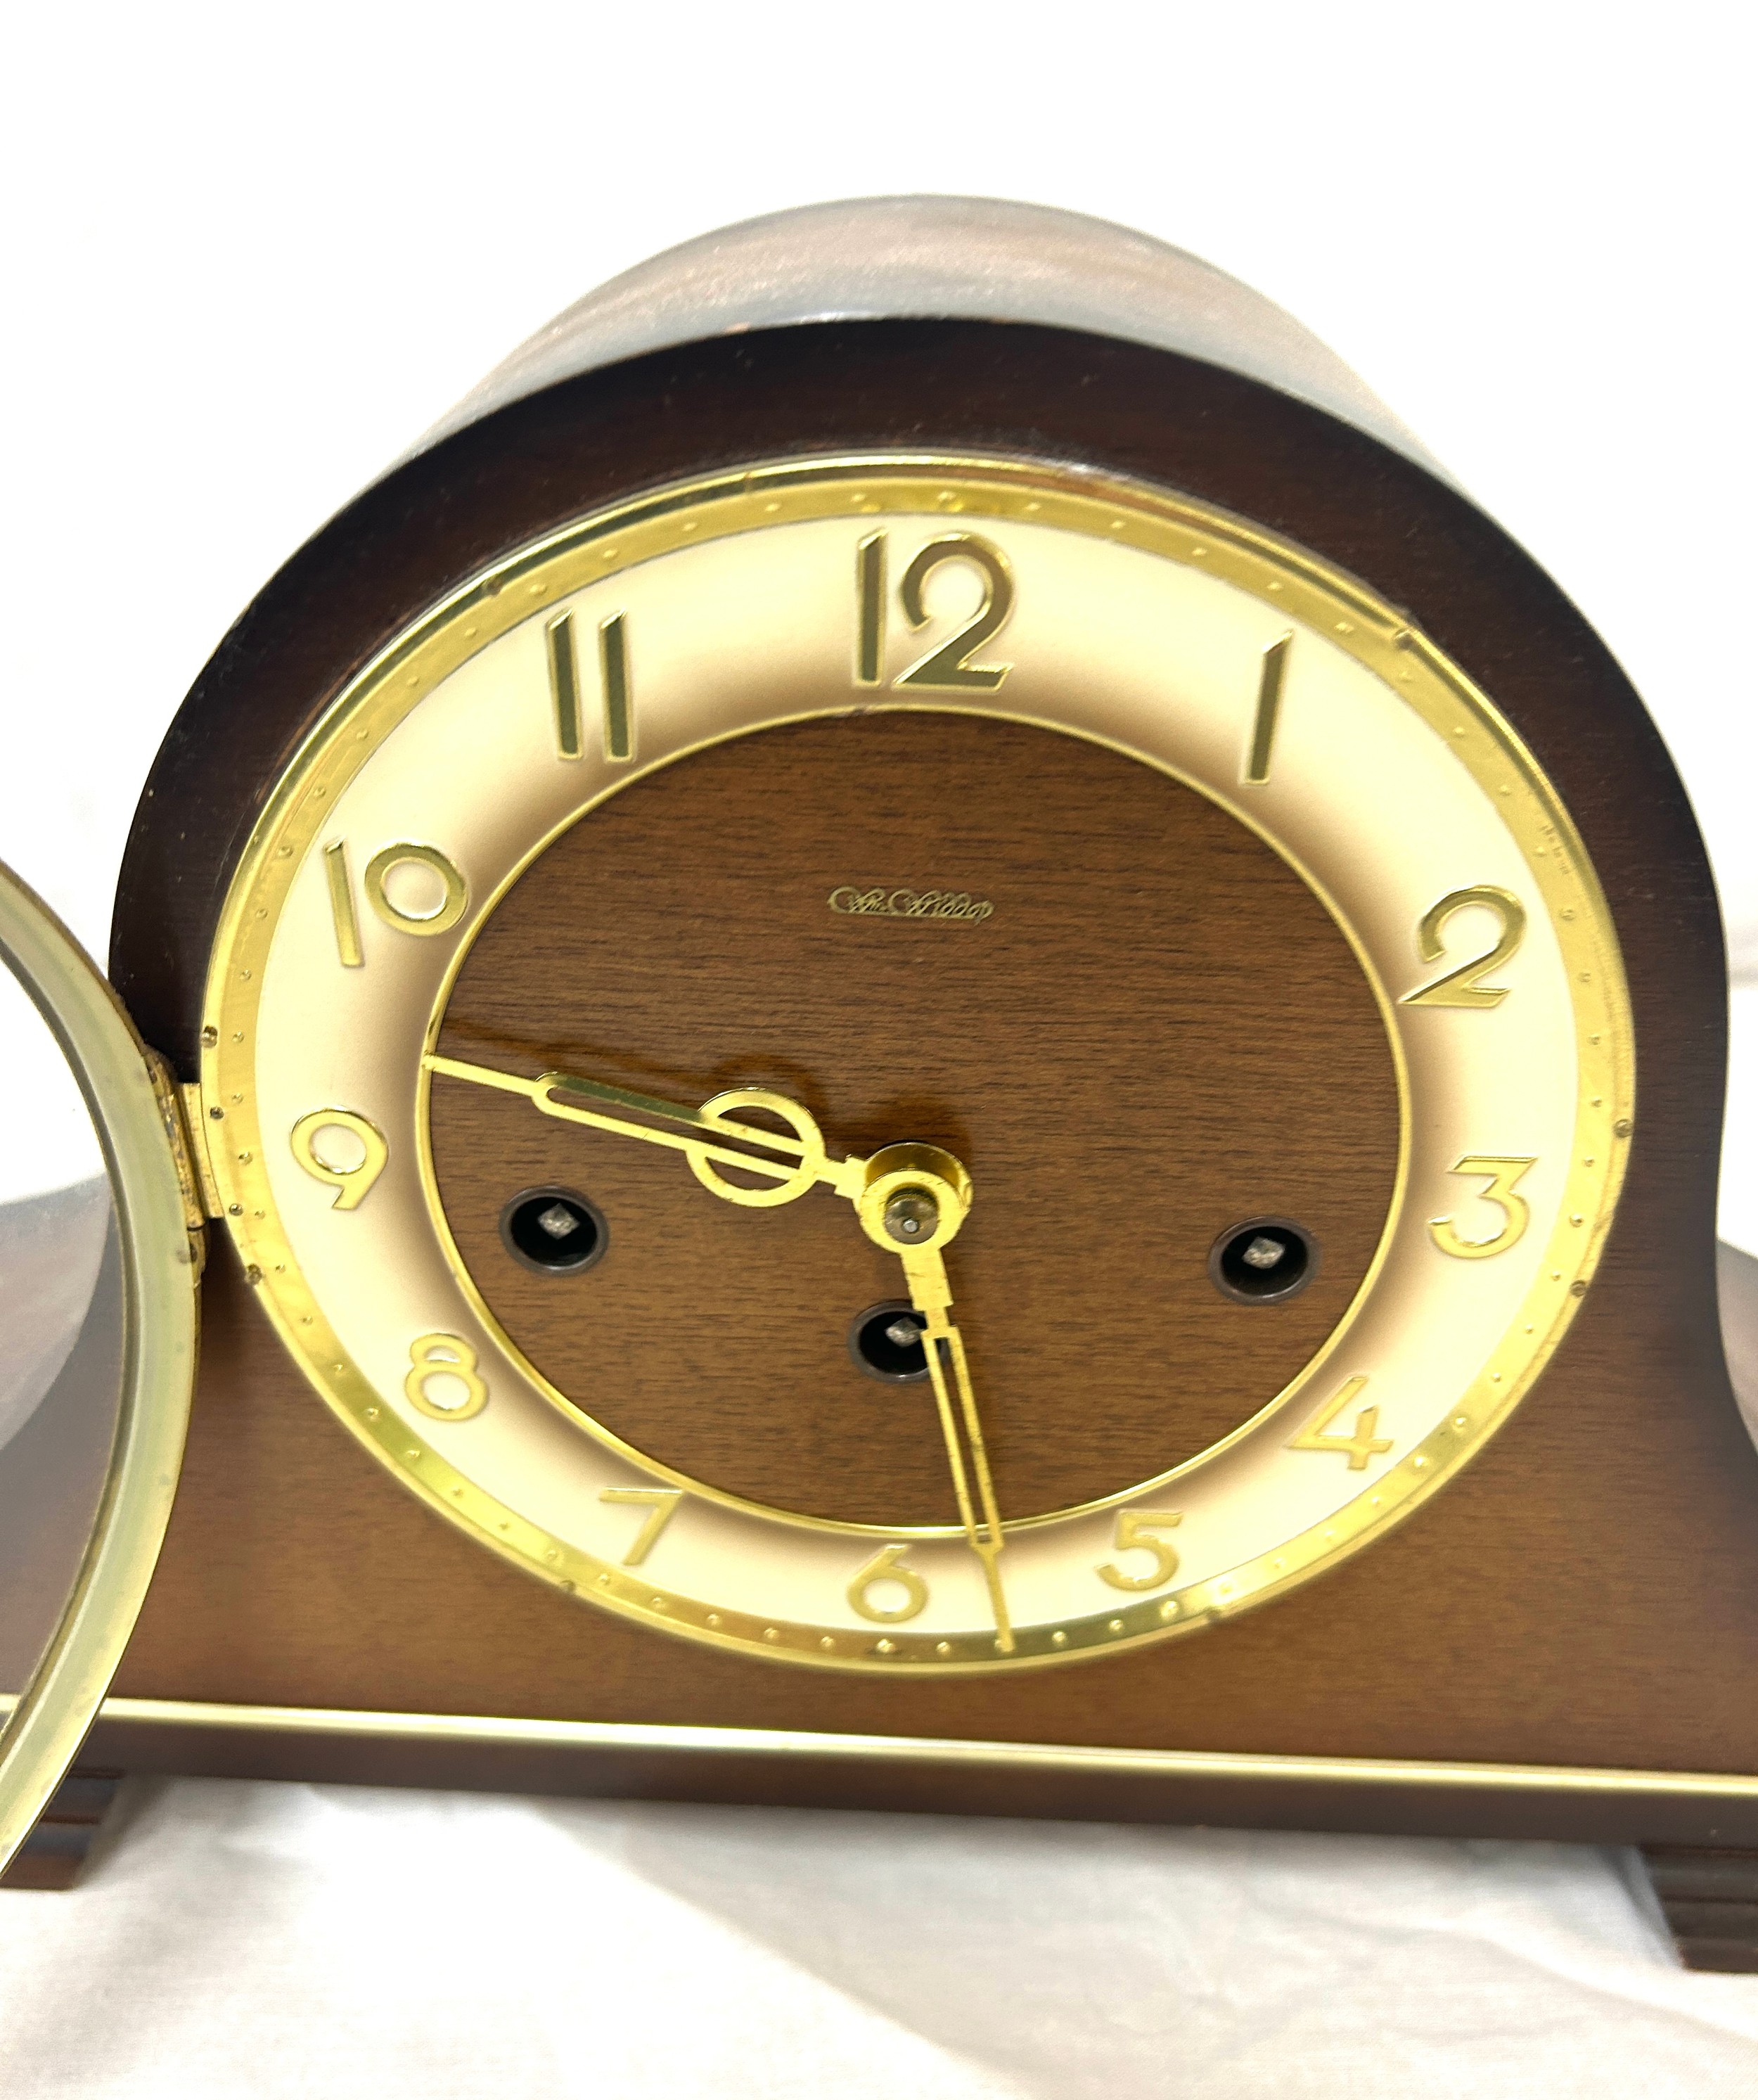 Vintage three key mantel clock with key measures approx 9 inches tall by 17 inches wide, untested - Image 2 of 4